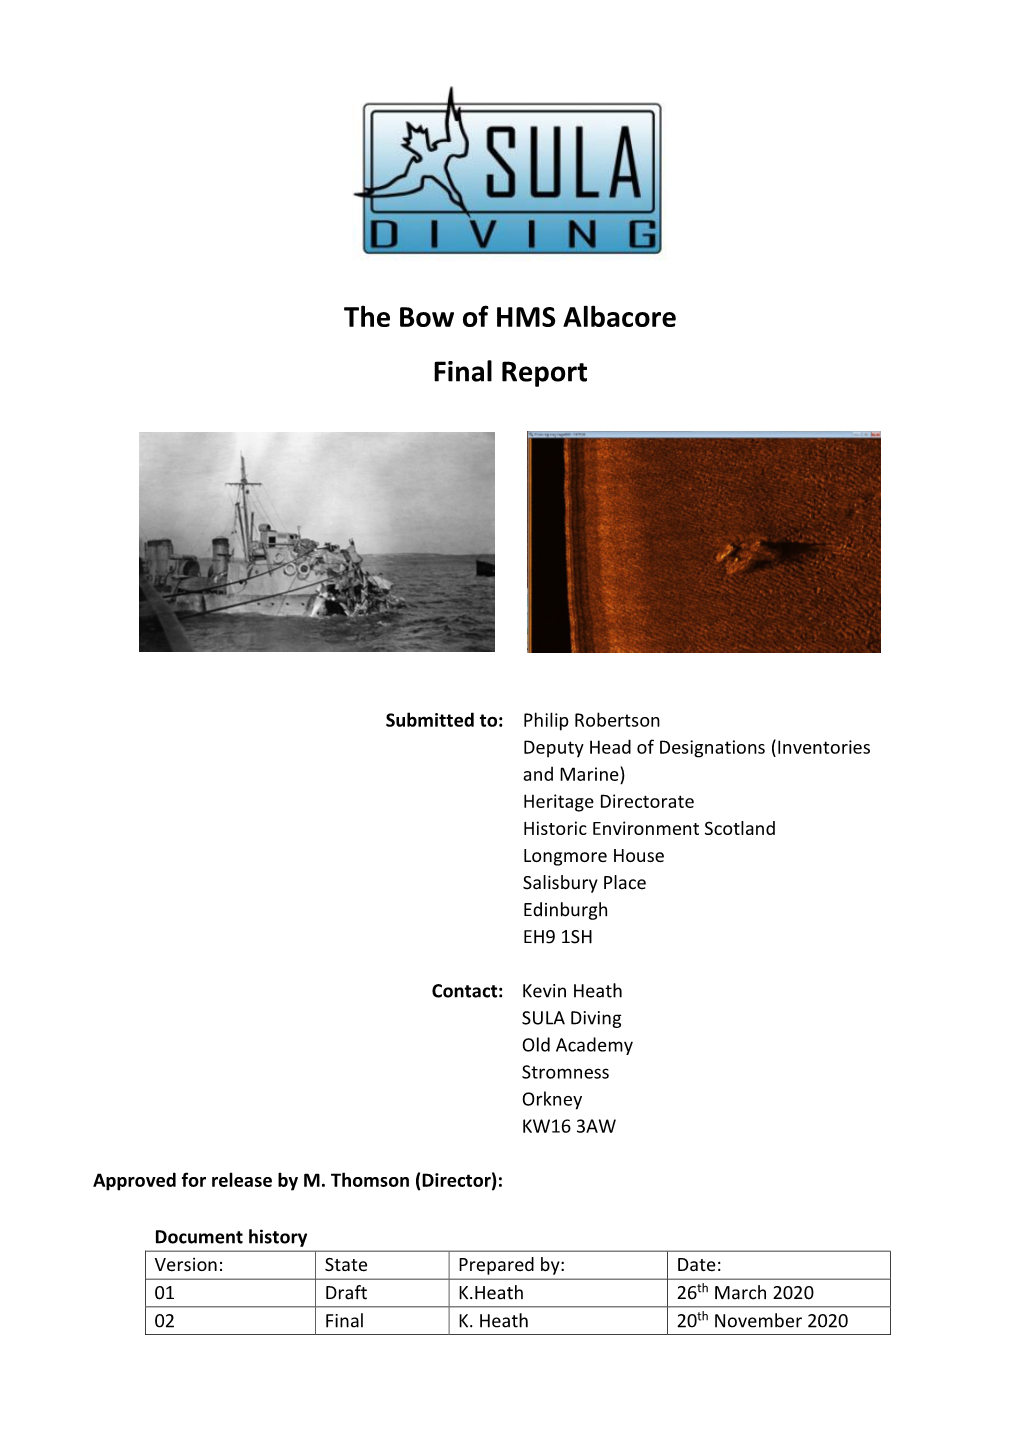 The Bow of HMS Albacore Final Report